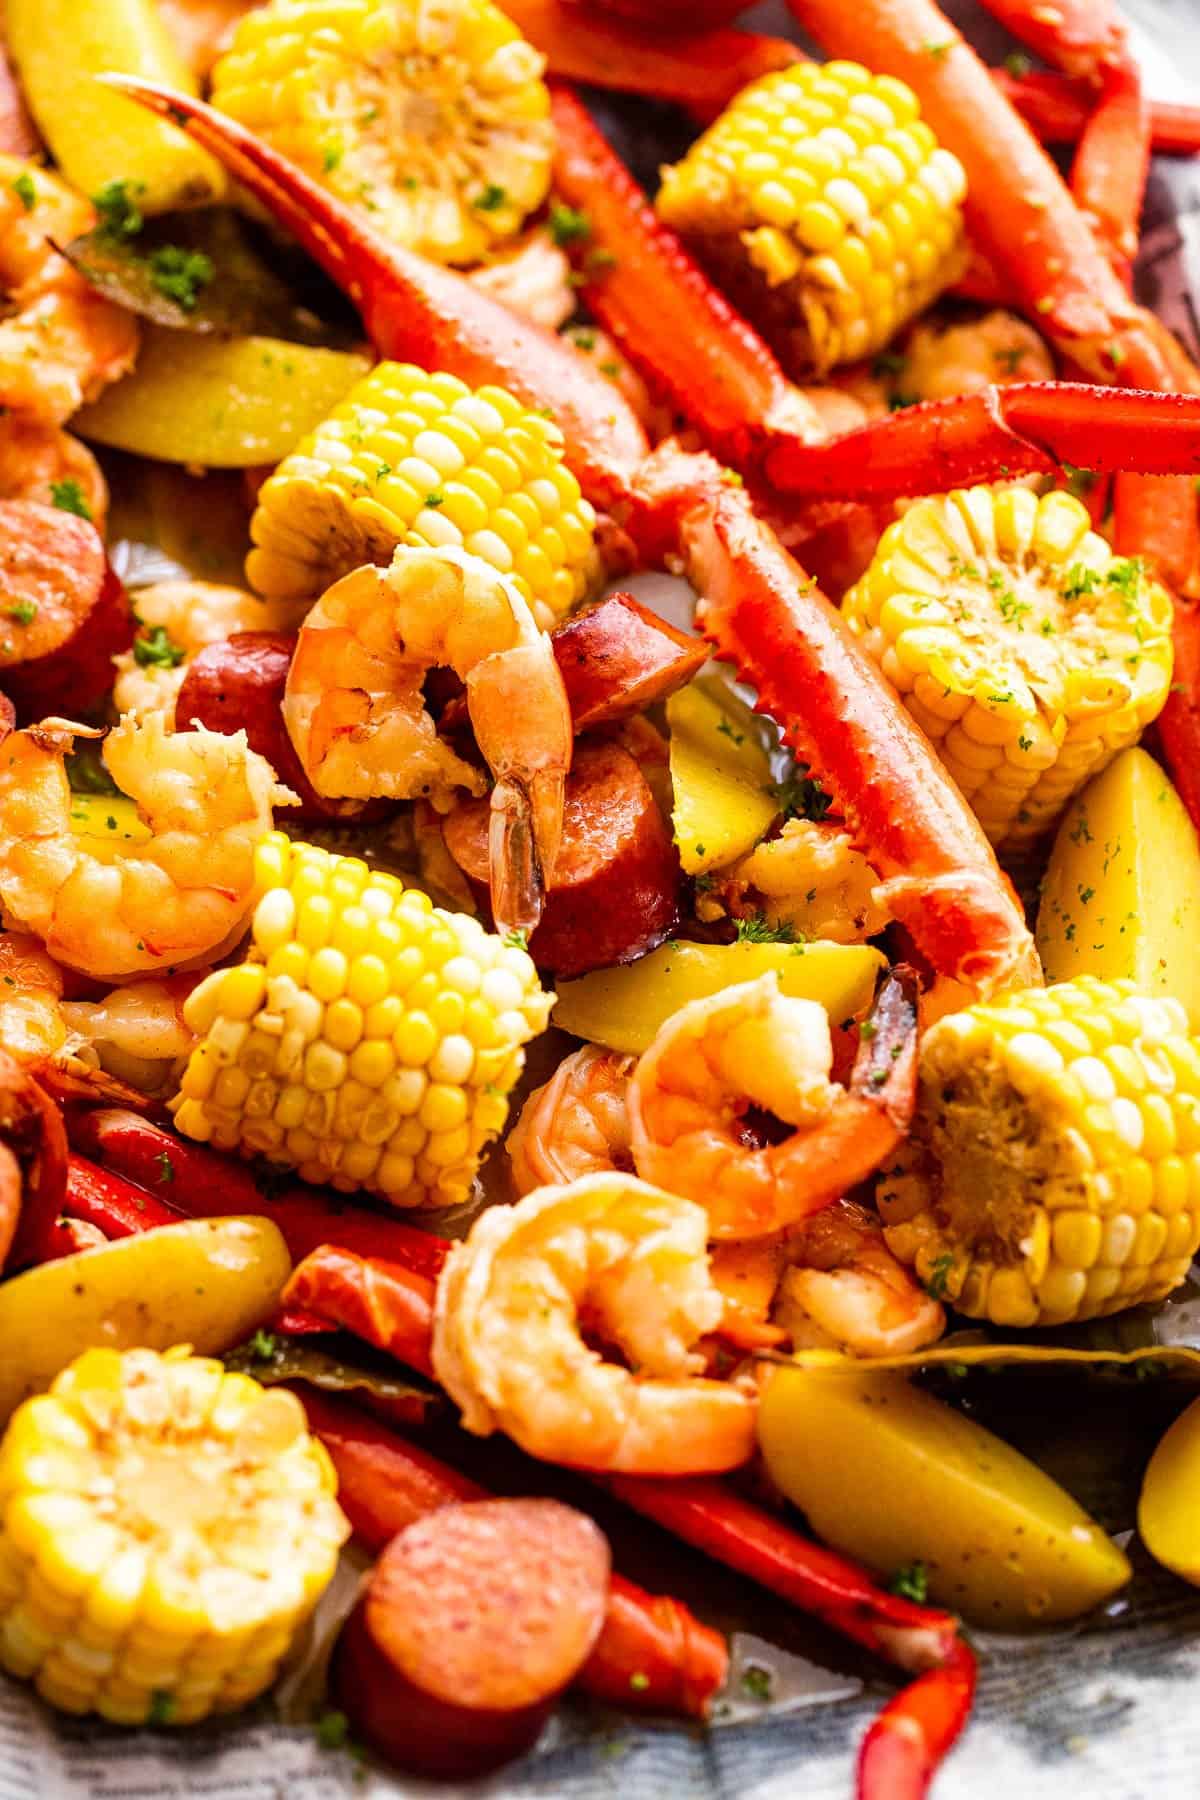 Image of seafood boil with crab legs, shrimp, corn, potatoes, and sausages.